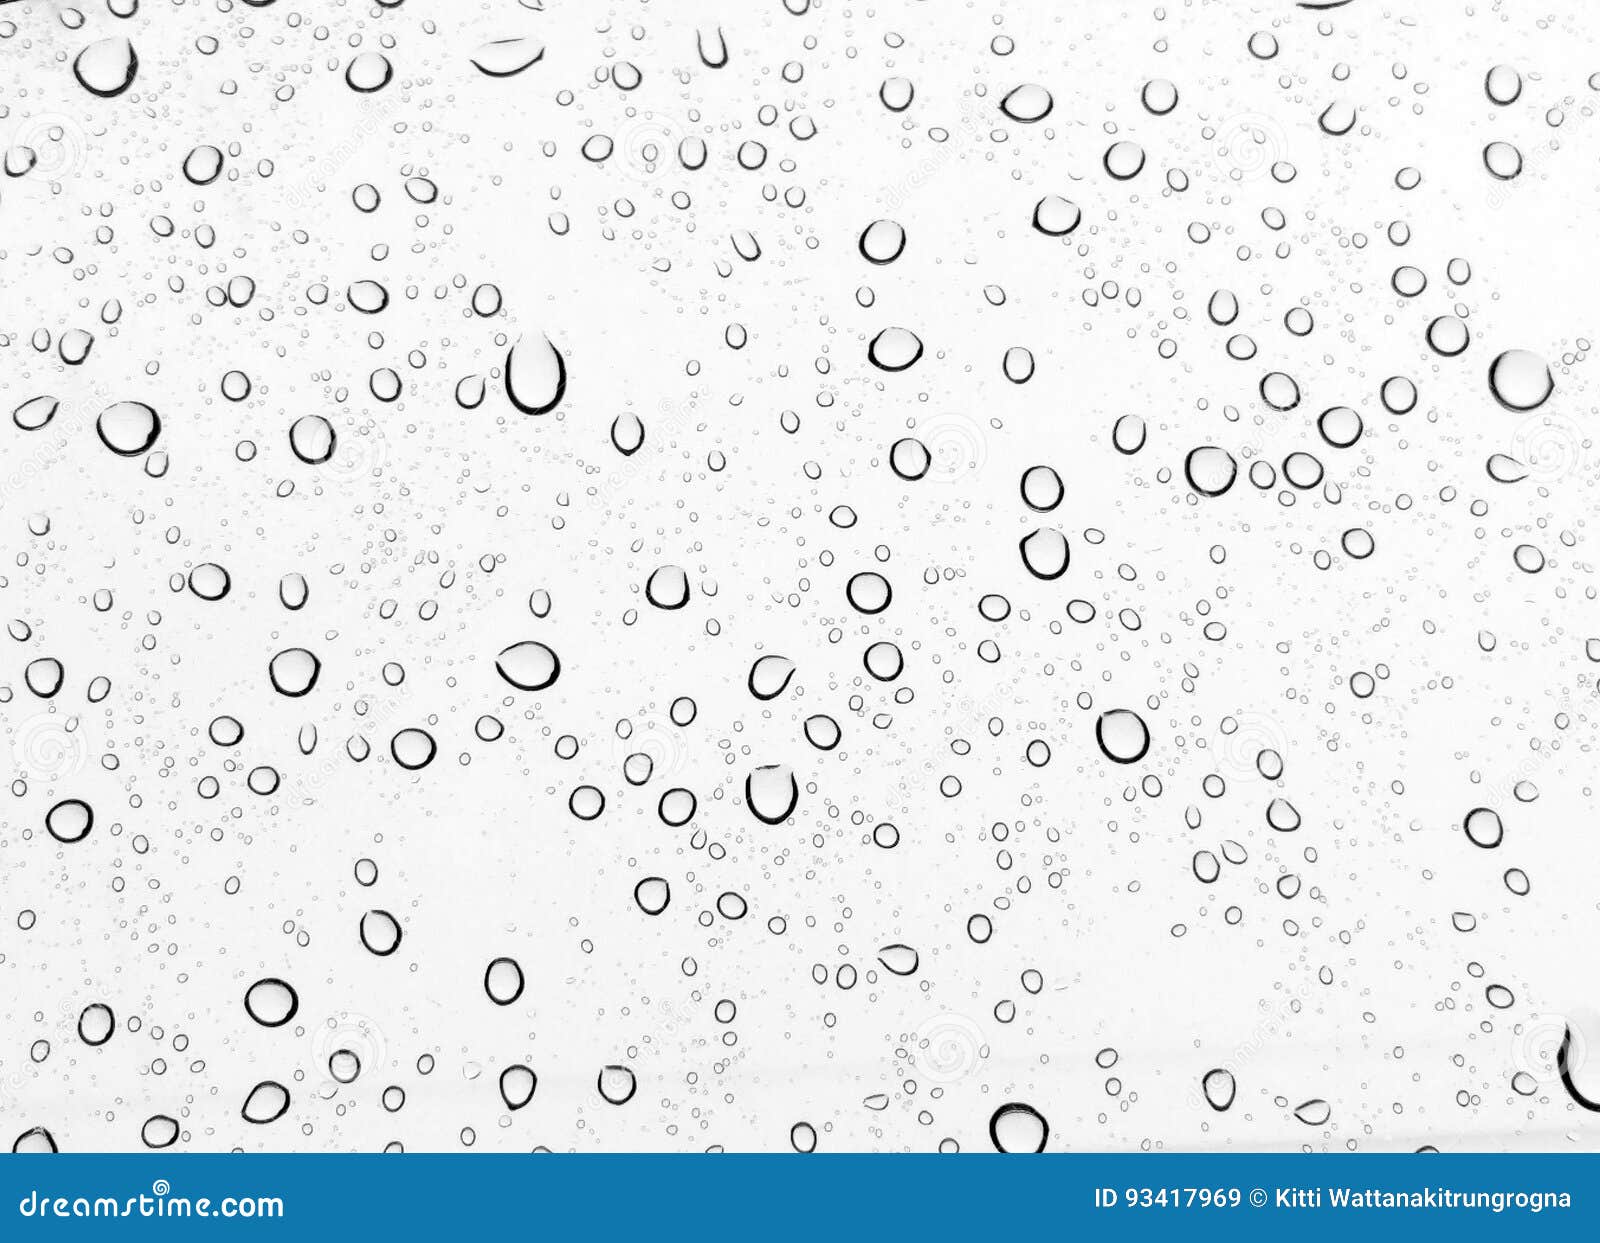 raindrops water drop on window glass white background